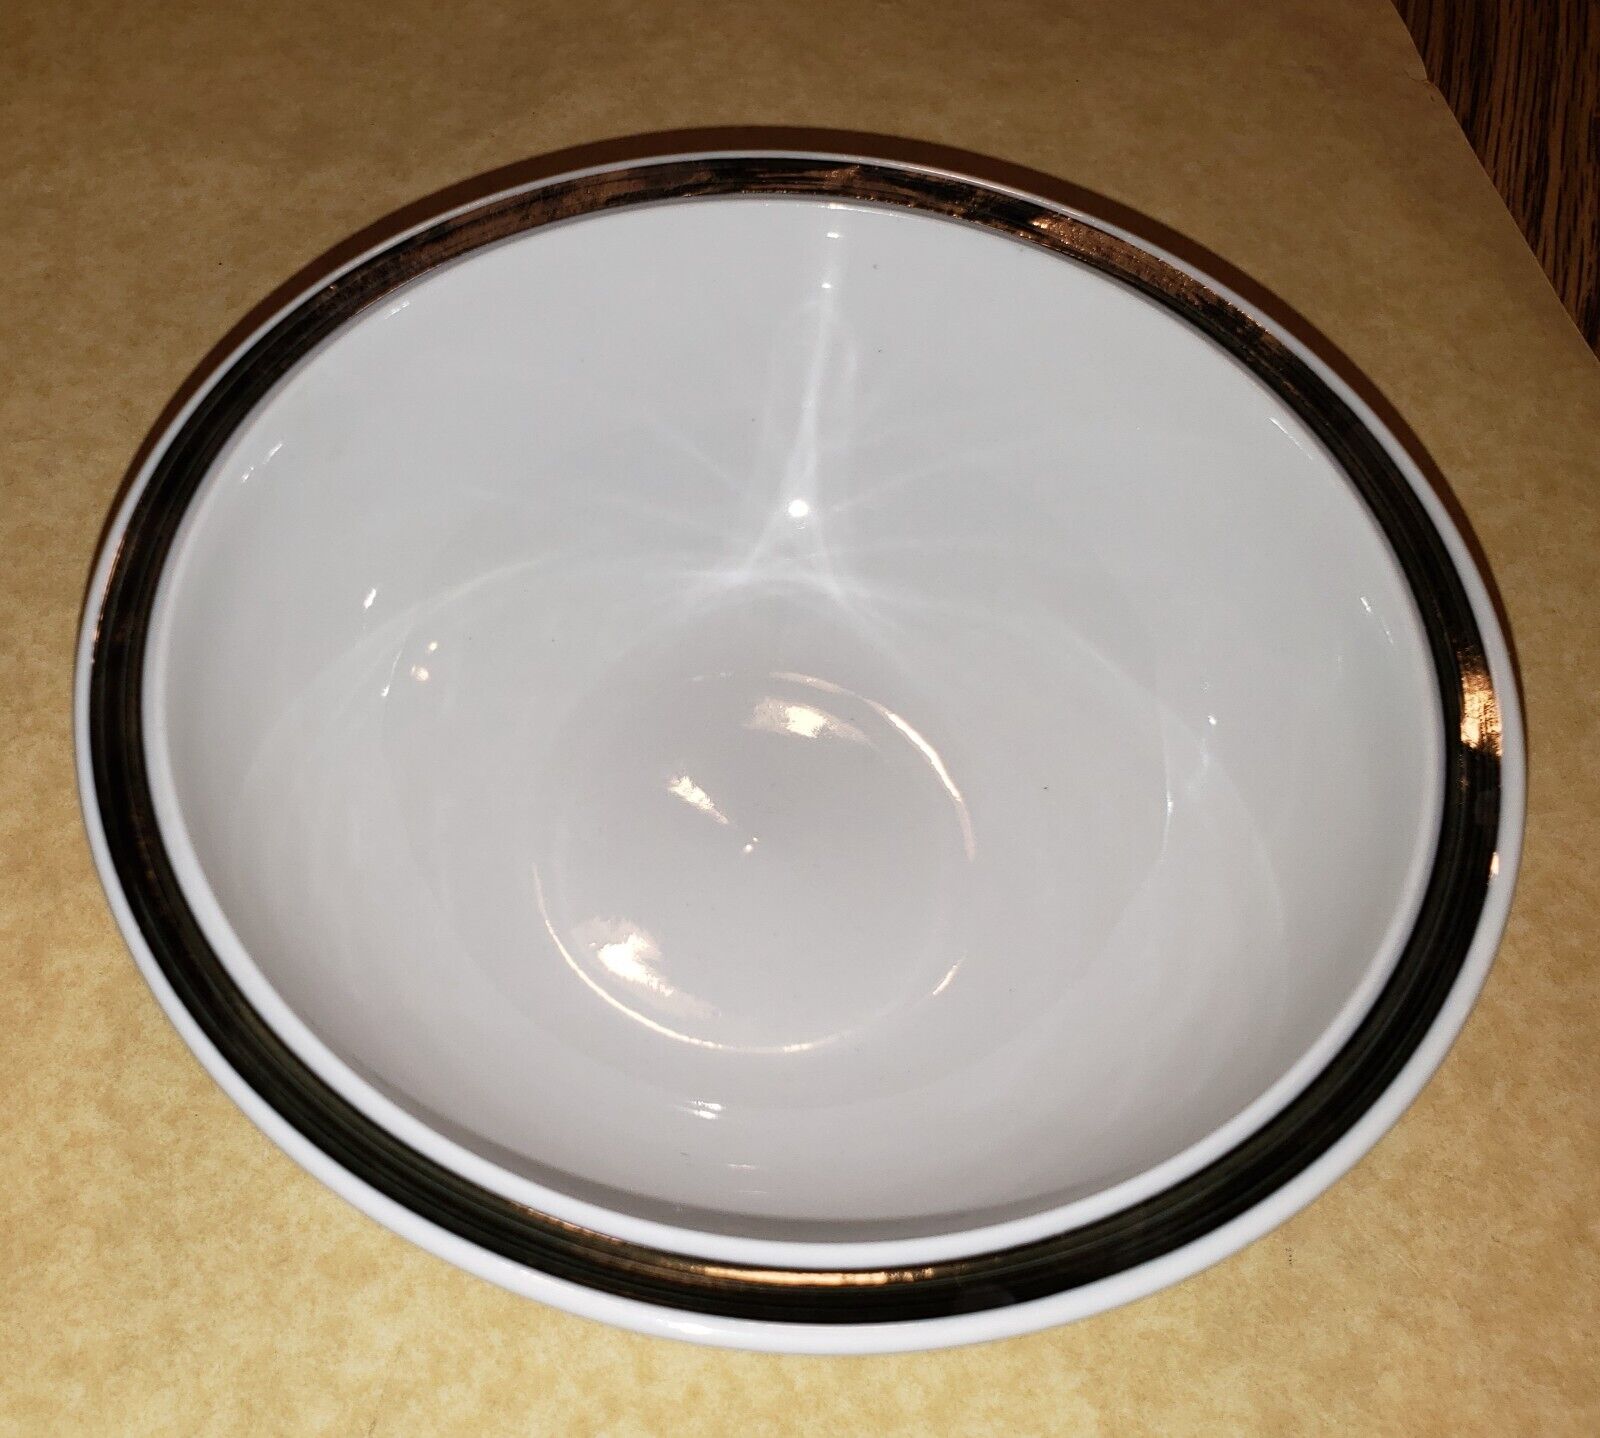 4 Gibson Designs Basic Living Bowls White & Black Rim Cereal Bowls 6” Soup Cup